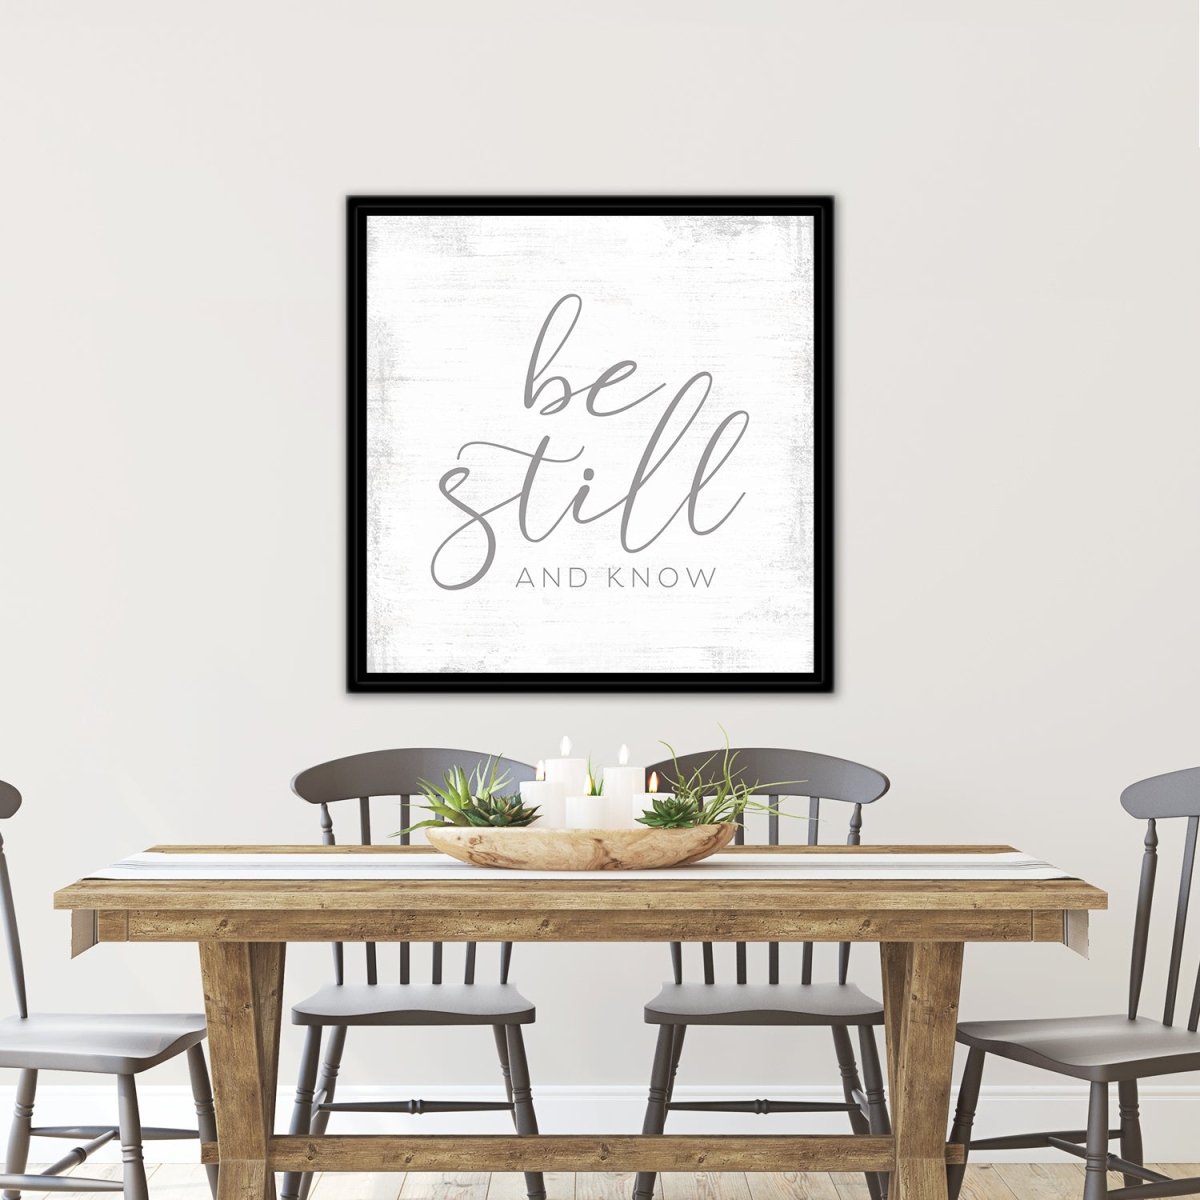 Be Still And Know Christian Wall Art Above Table in Kitchen - Pretty Perfect Studio